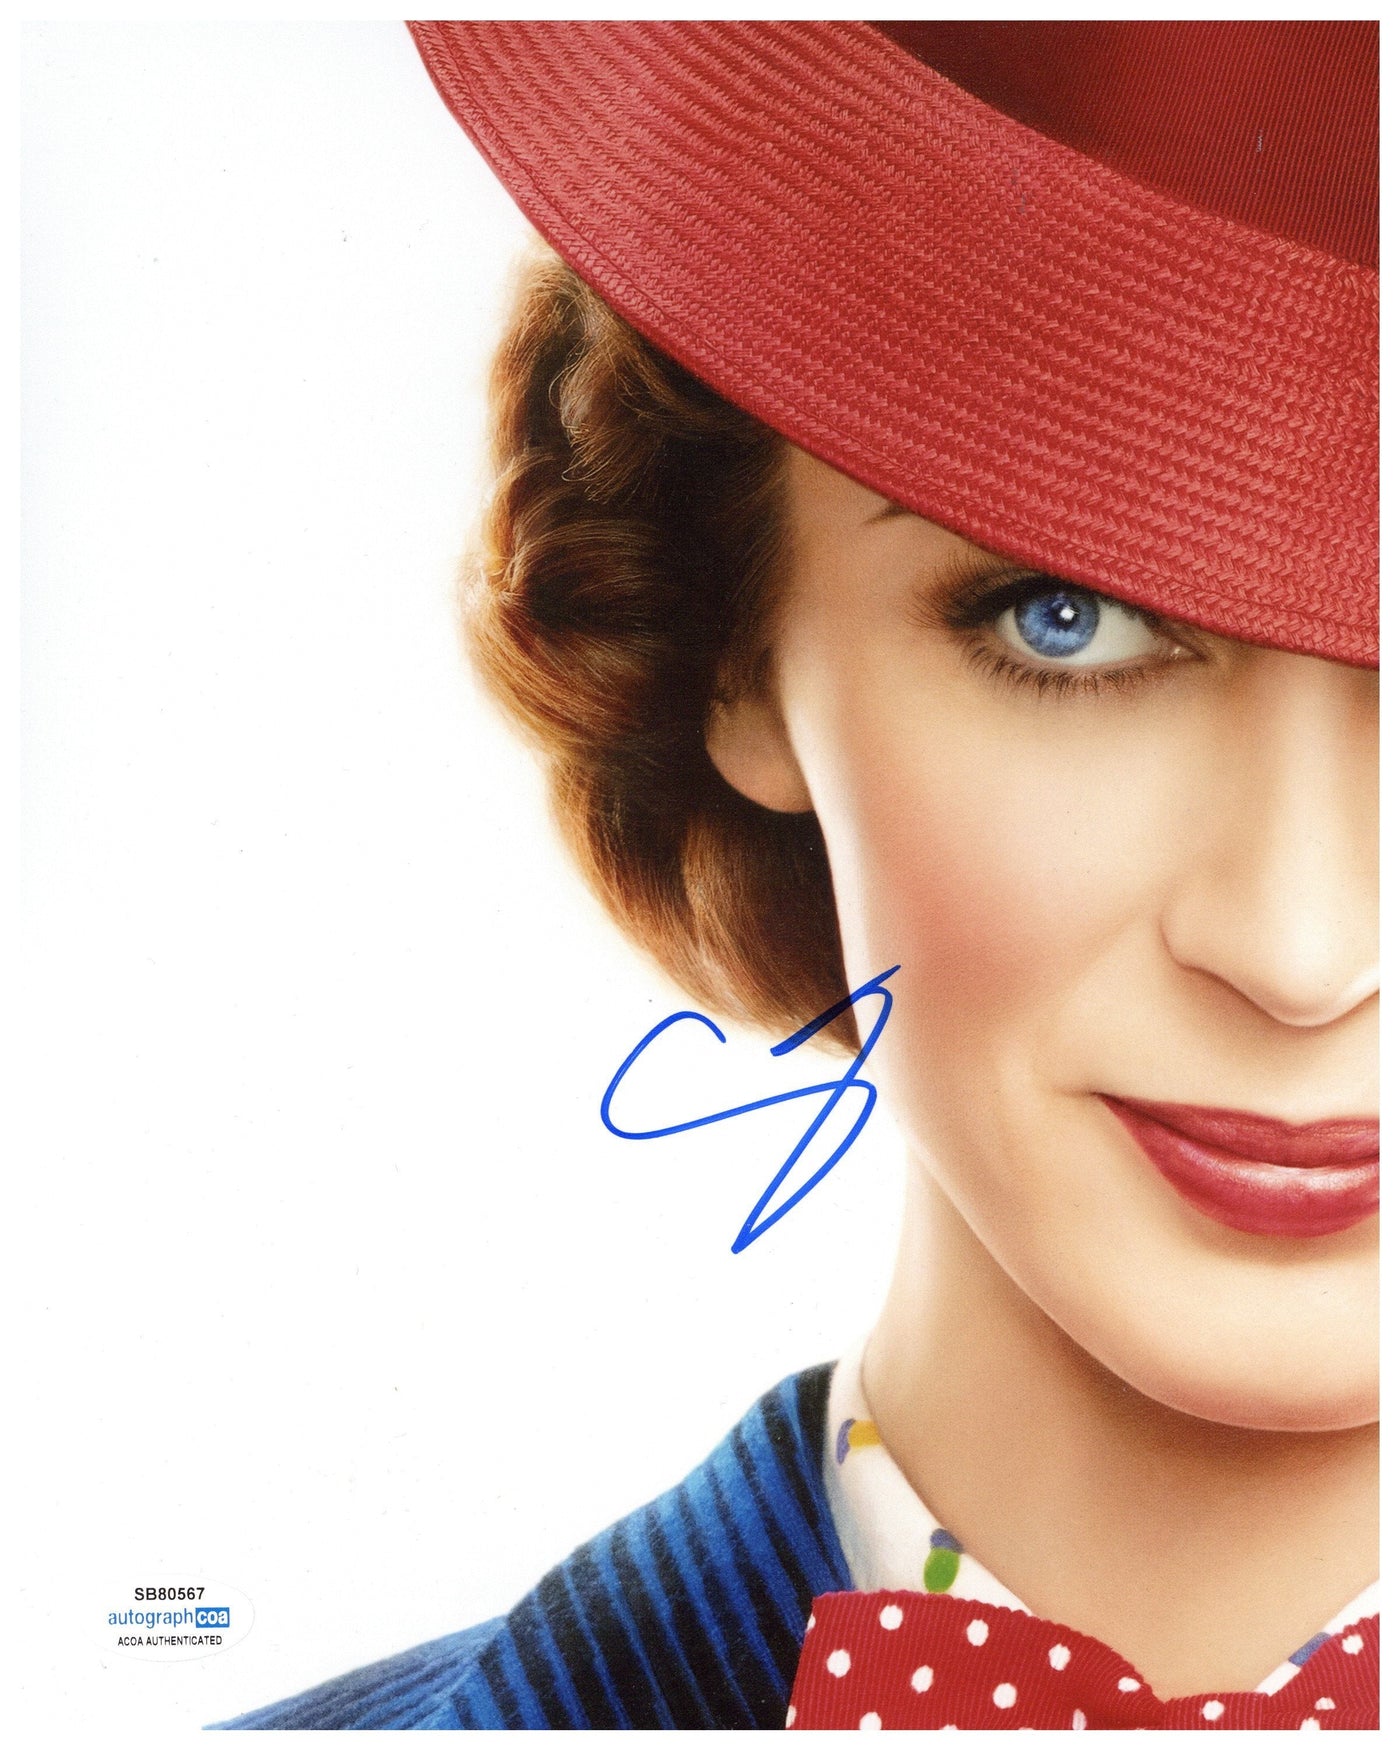 Emily Blunt Signed 8x10 Photo Mary Poppins Autographed ACOA #4